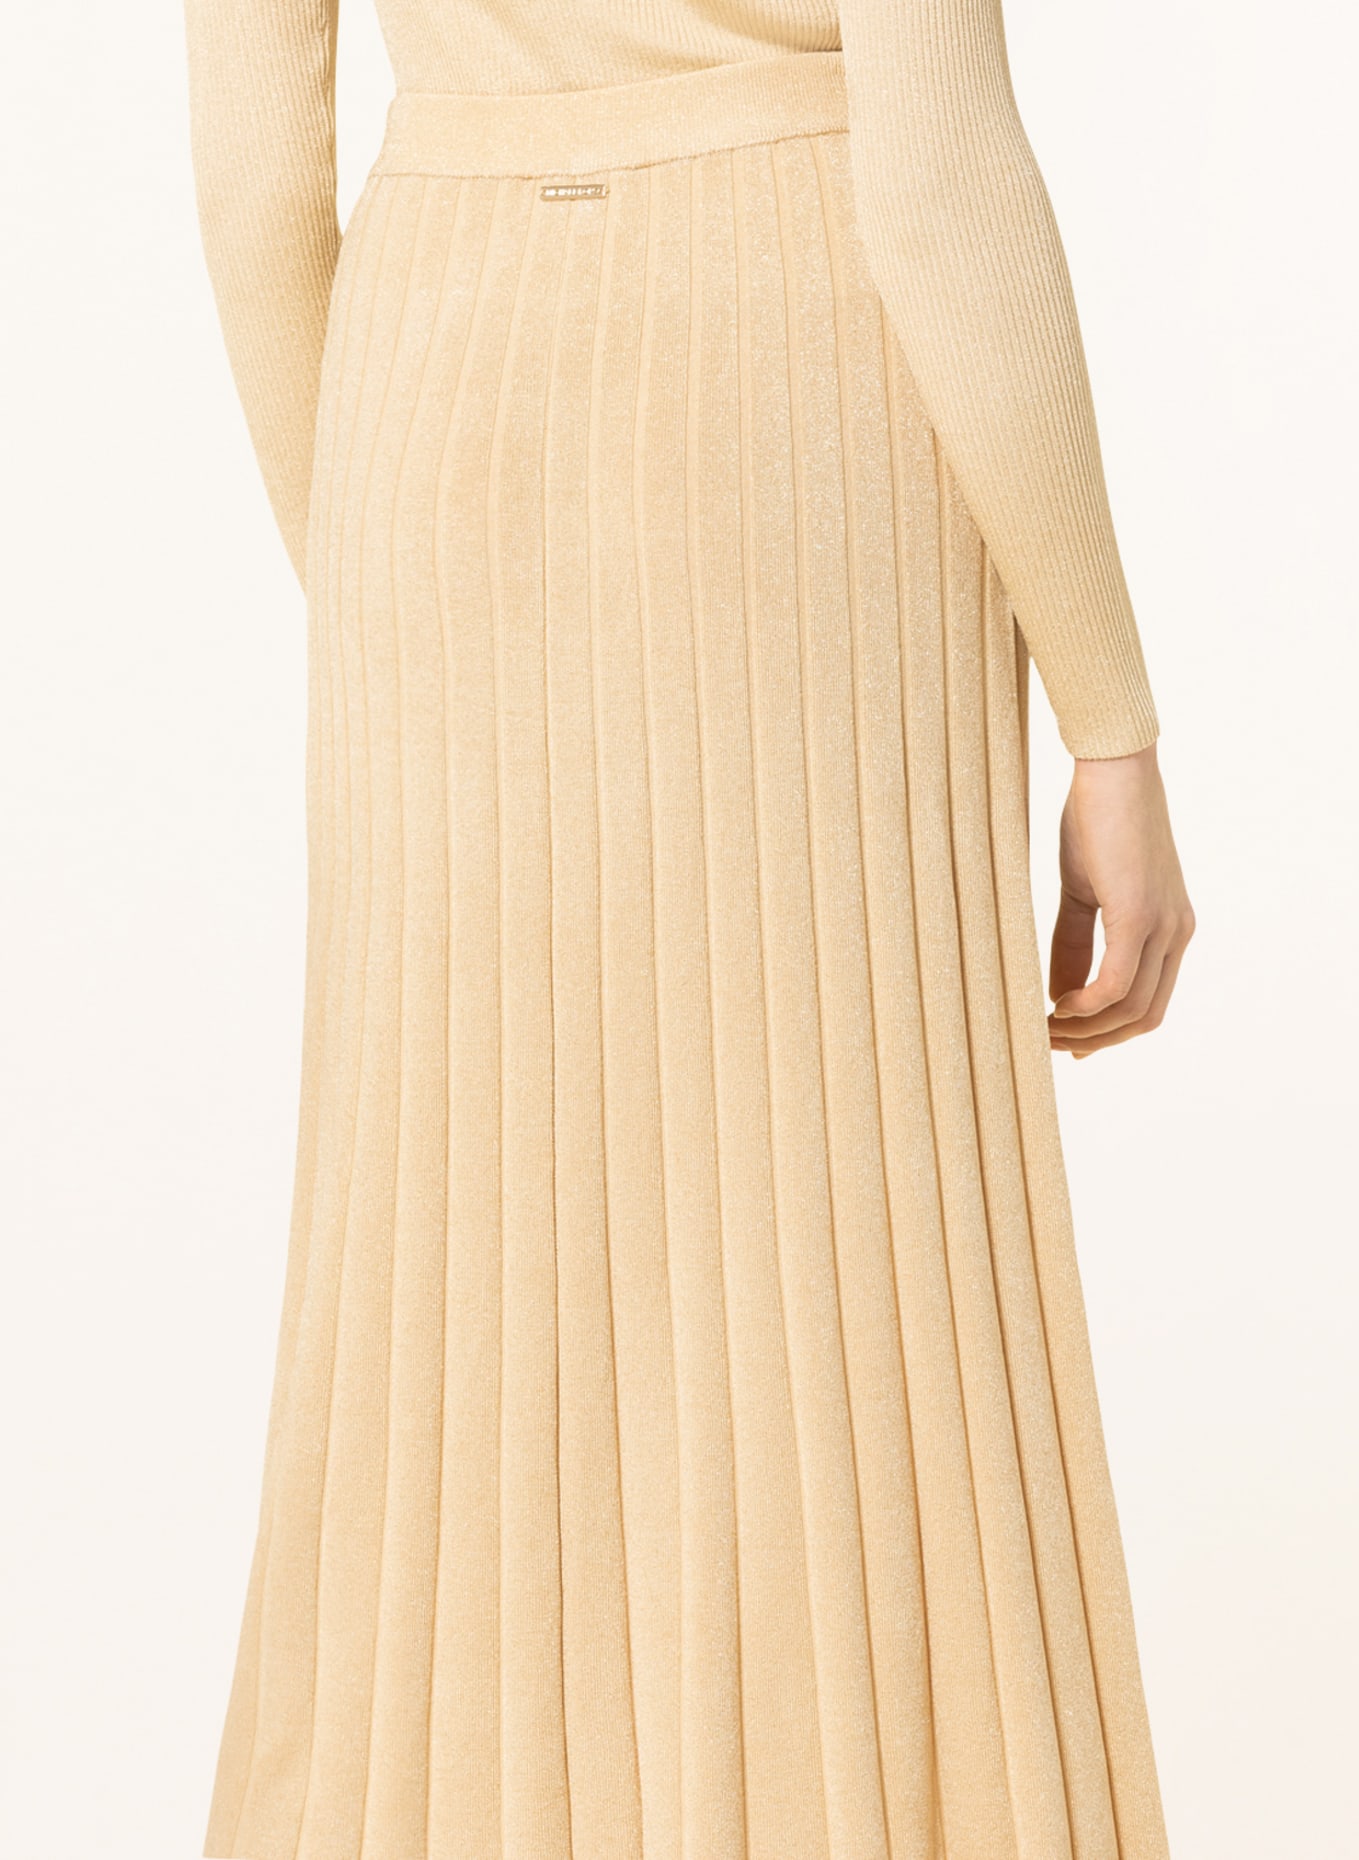 MICHAEL KORS Knit skirt with glitter thread, Color: GOLD (Image 4)